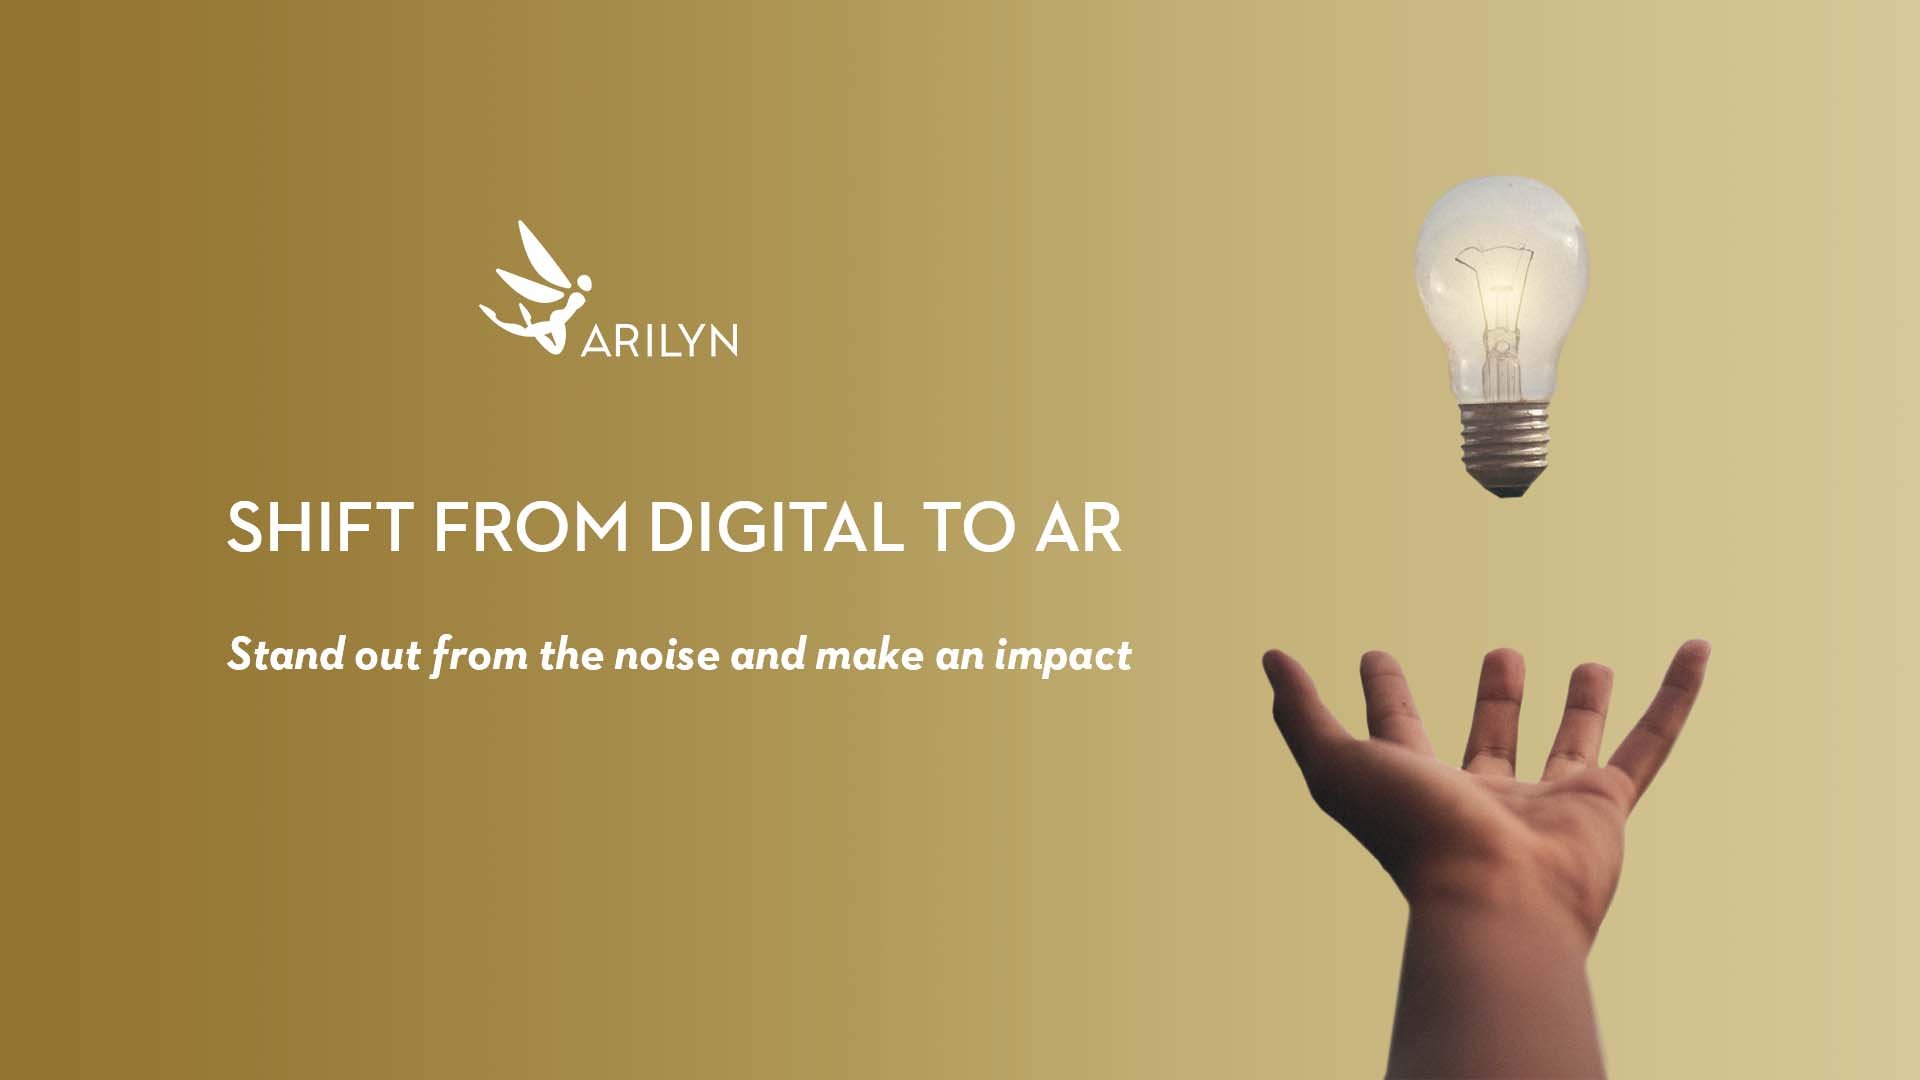 Shift from digital to AR marketing is nigh - stand out from the noise